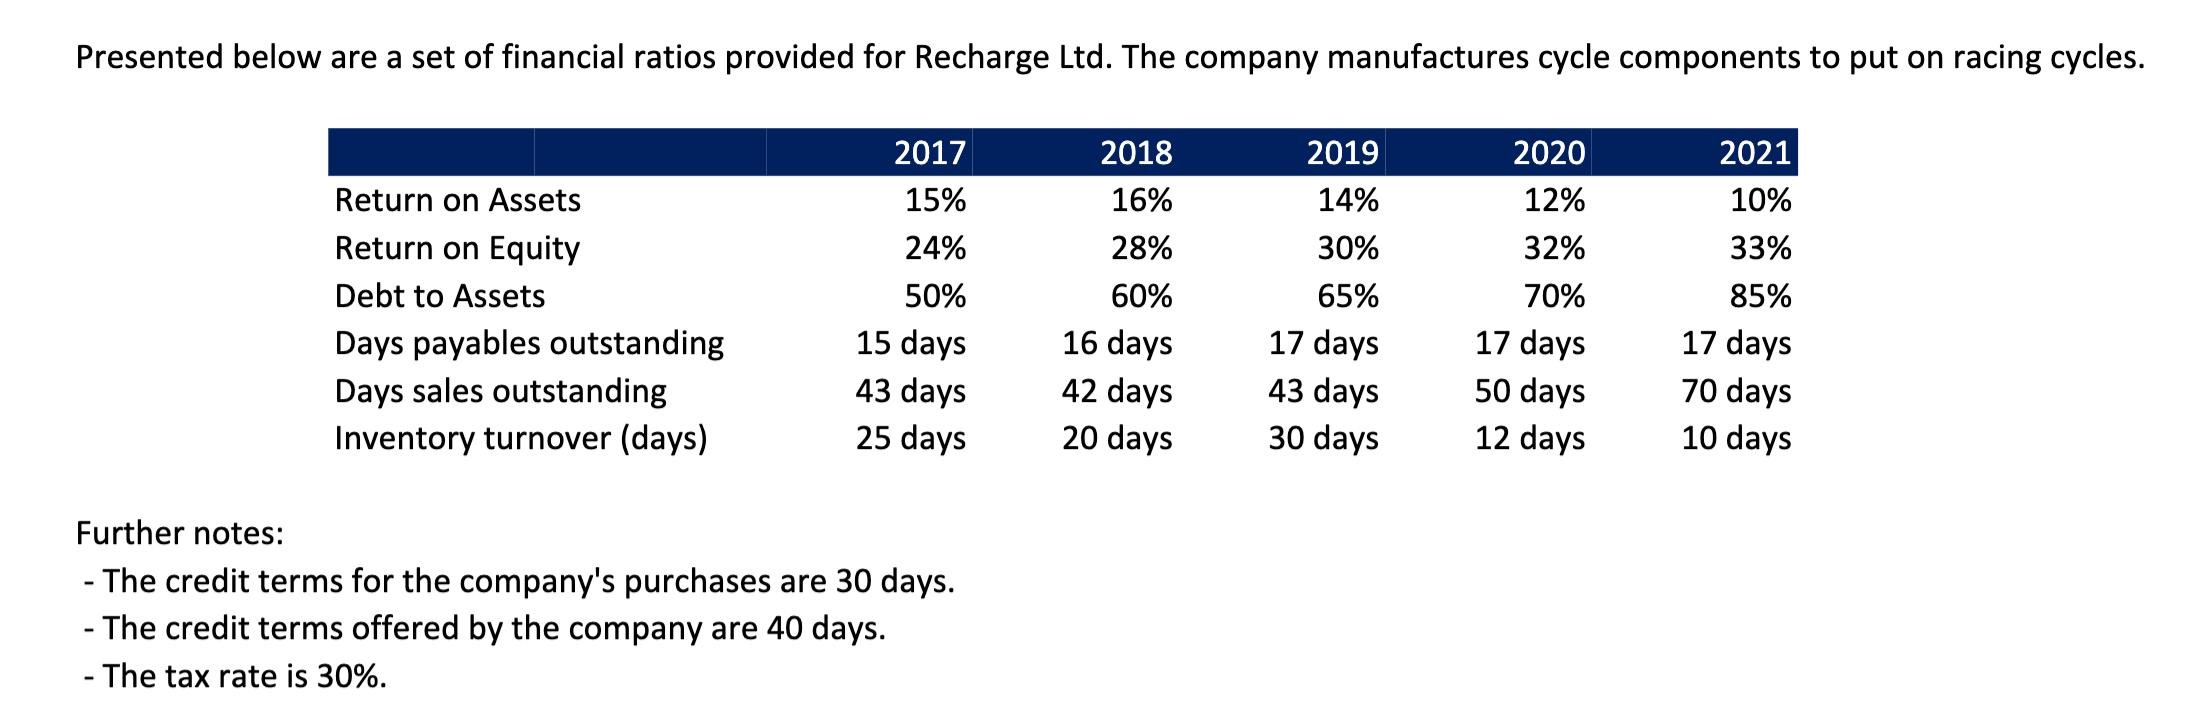 Presented below are a set of financial ratios provided for Recharge Ltd. The company manufactures cycle components to put on